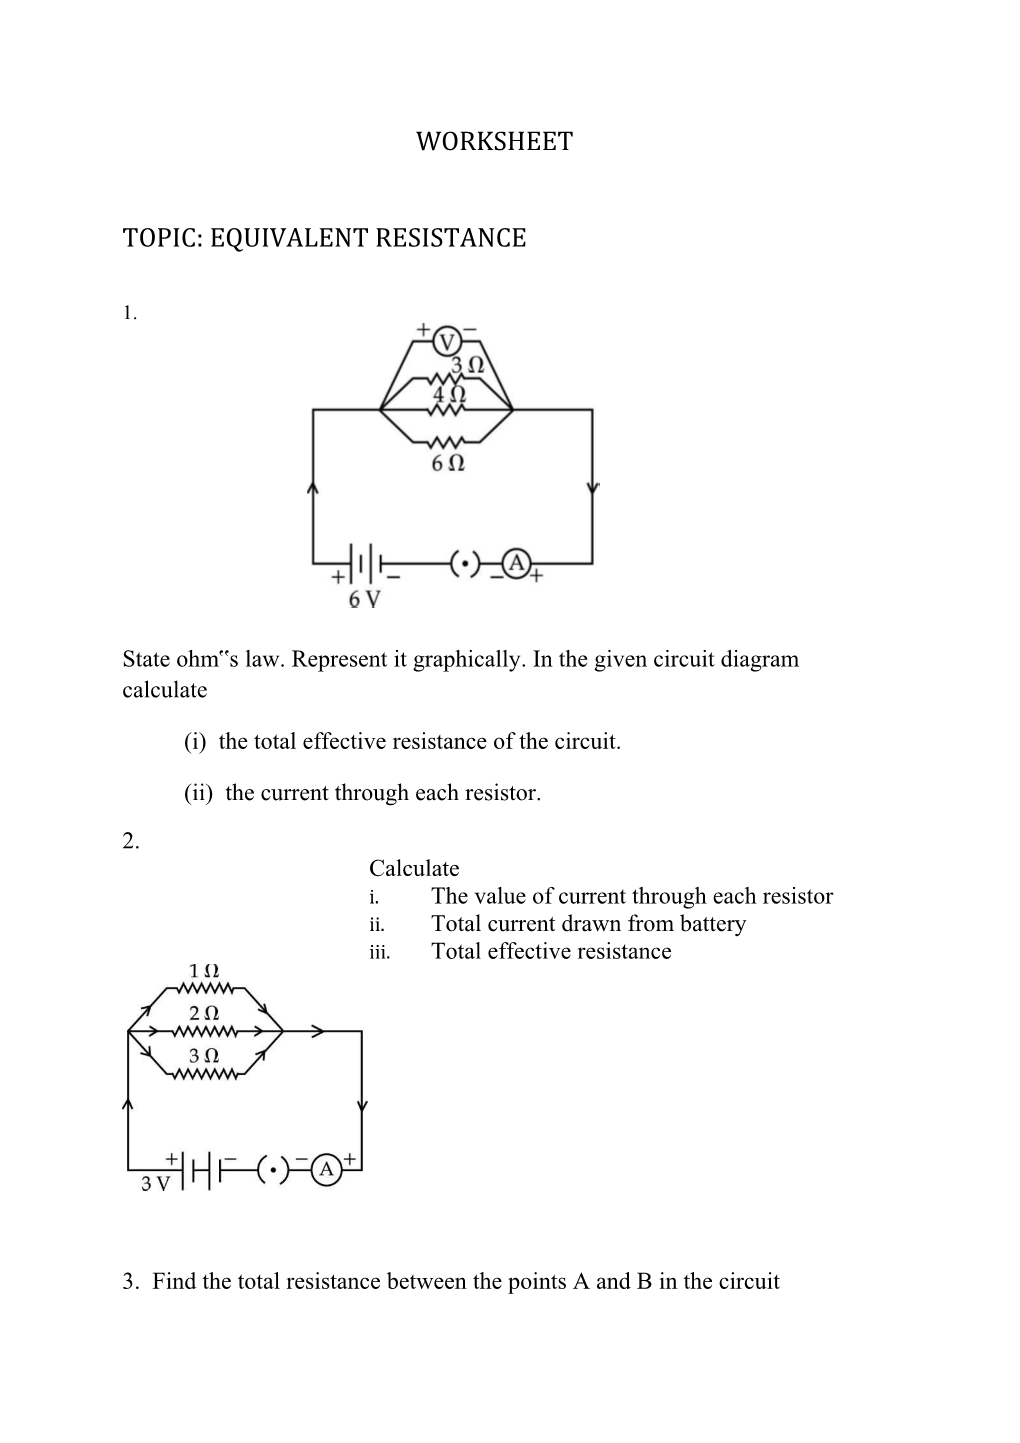 State Ohm S Law. Represent It Graphically. in the Given Circuit Diagram Calculate